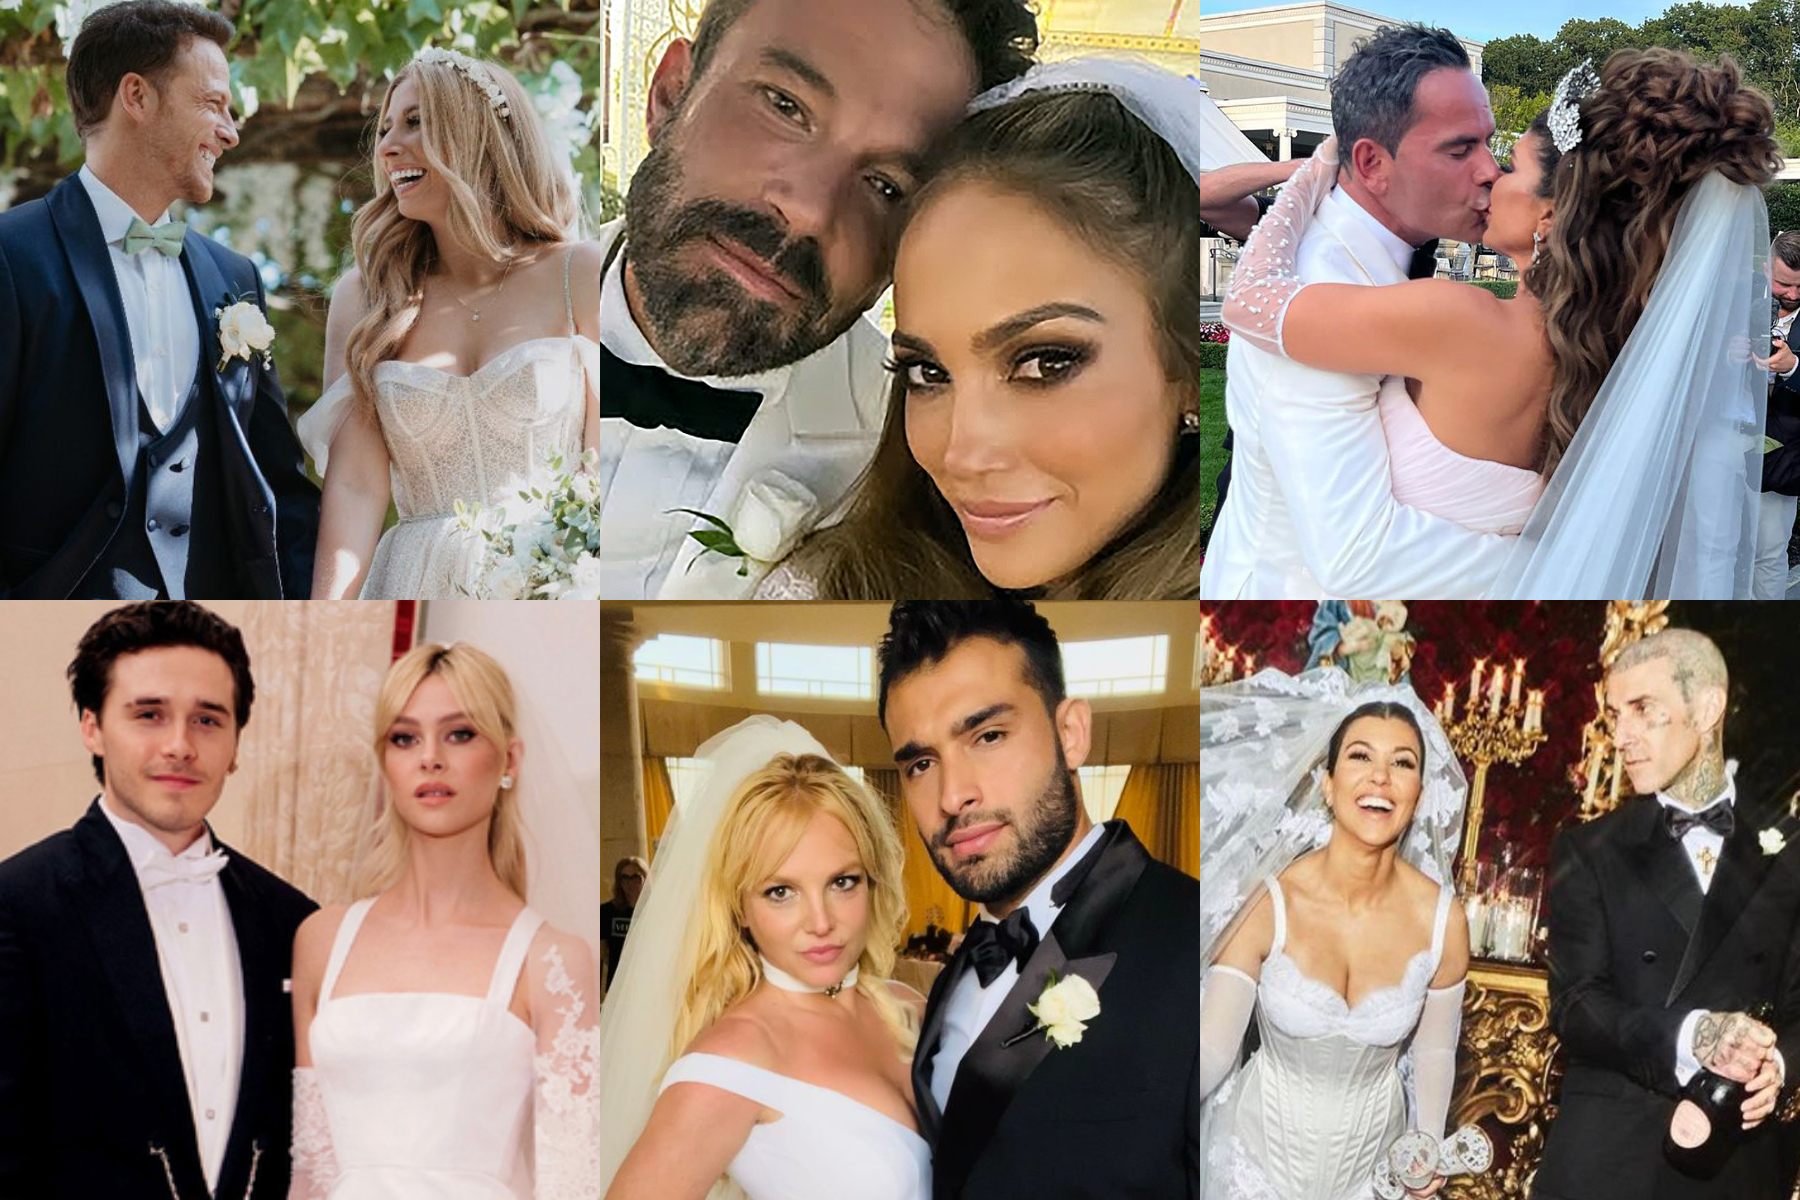 Celebrity Weddings 2022: Stars Who Got Married This Year